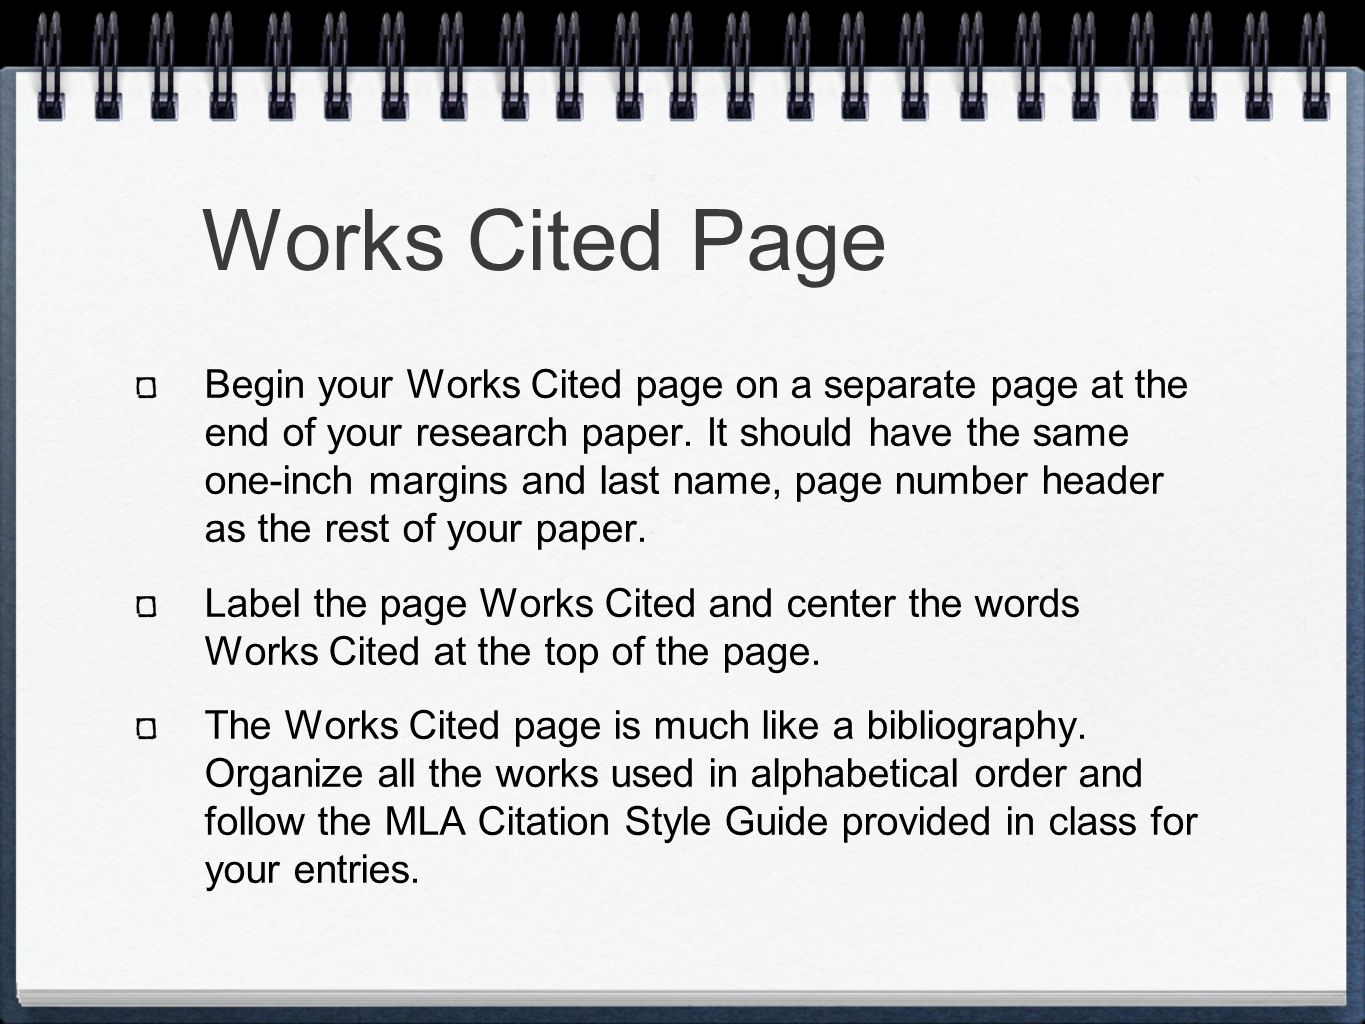 Works Cited Page Begin your Works Cited page on a separate page at the end of your research paper.